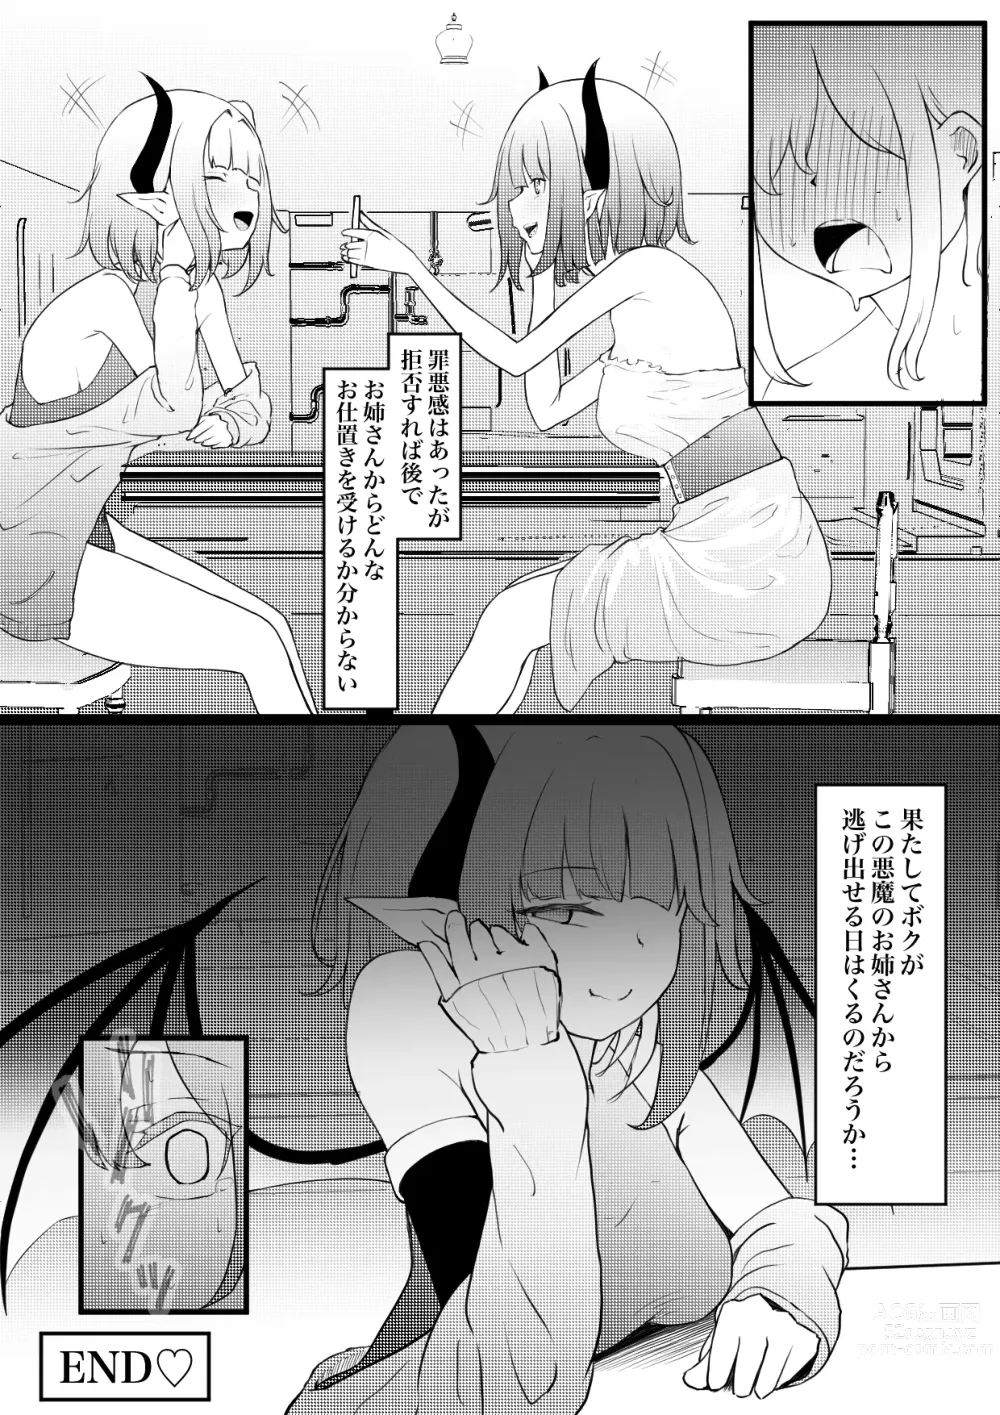 Page 26 of doujinshi permission